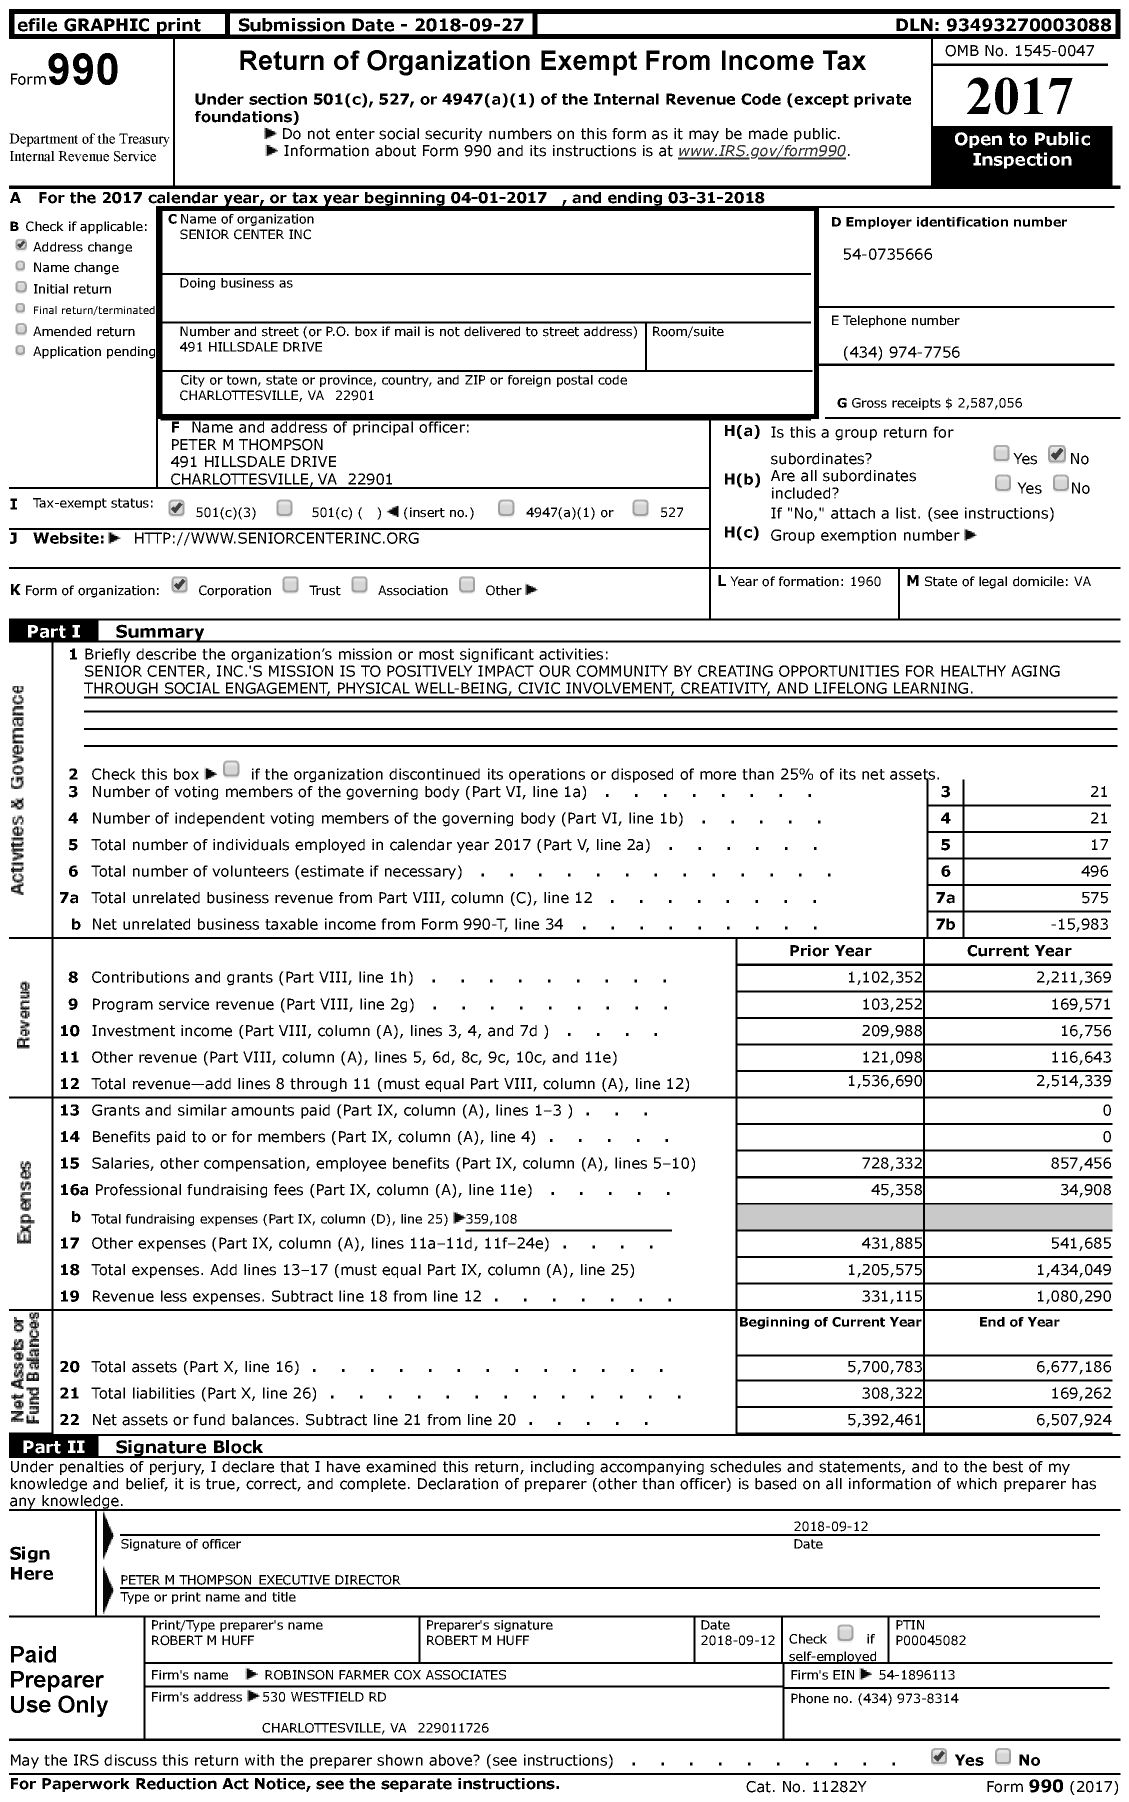 Image of first page of 2017 Form 990 for The Center / Senior Center Inc